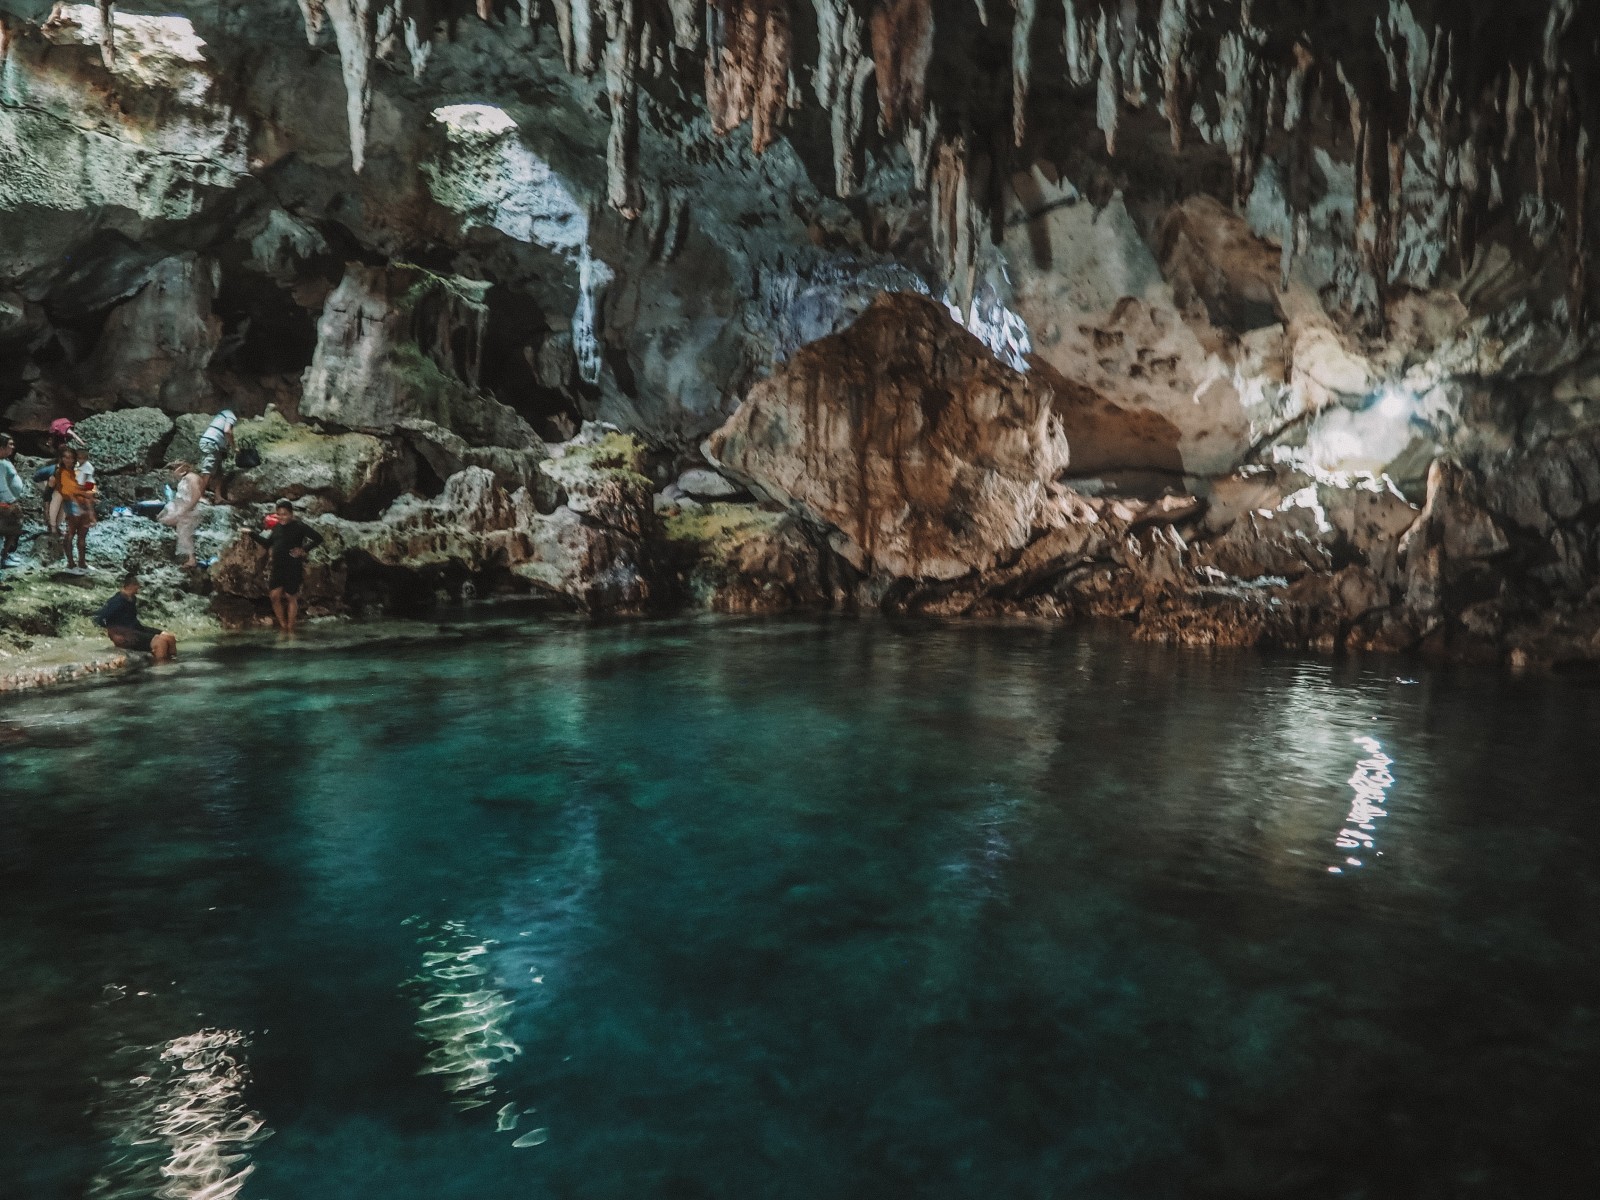 grotta Panglano in the Philippines